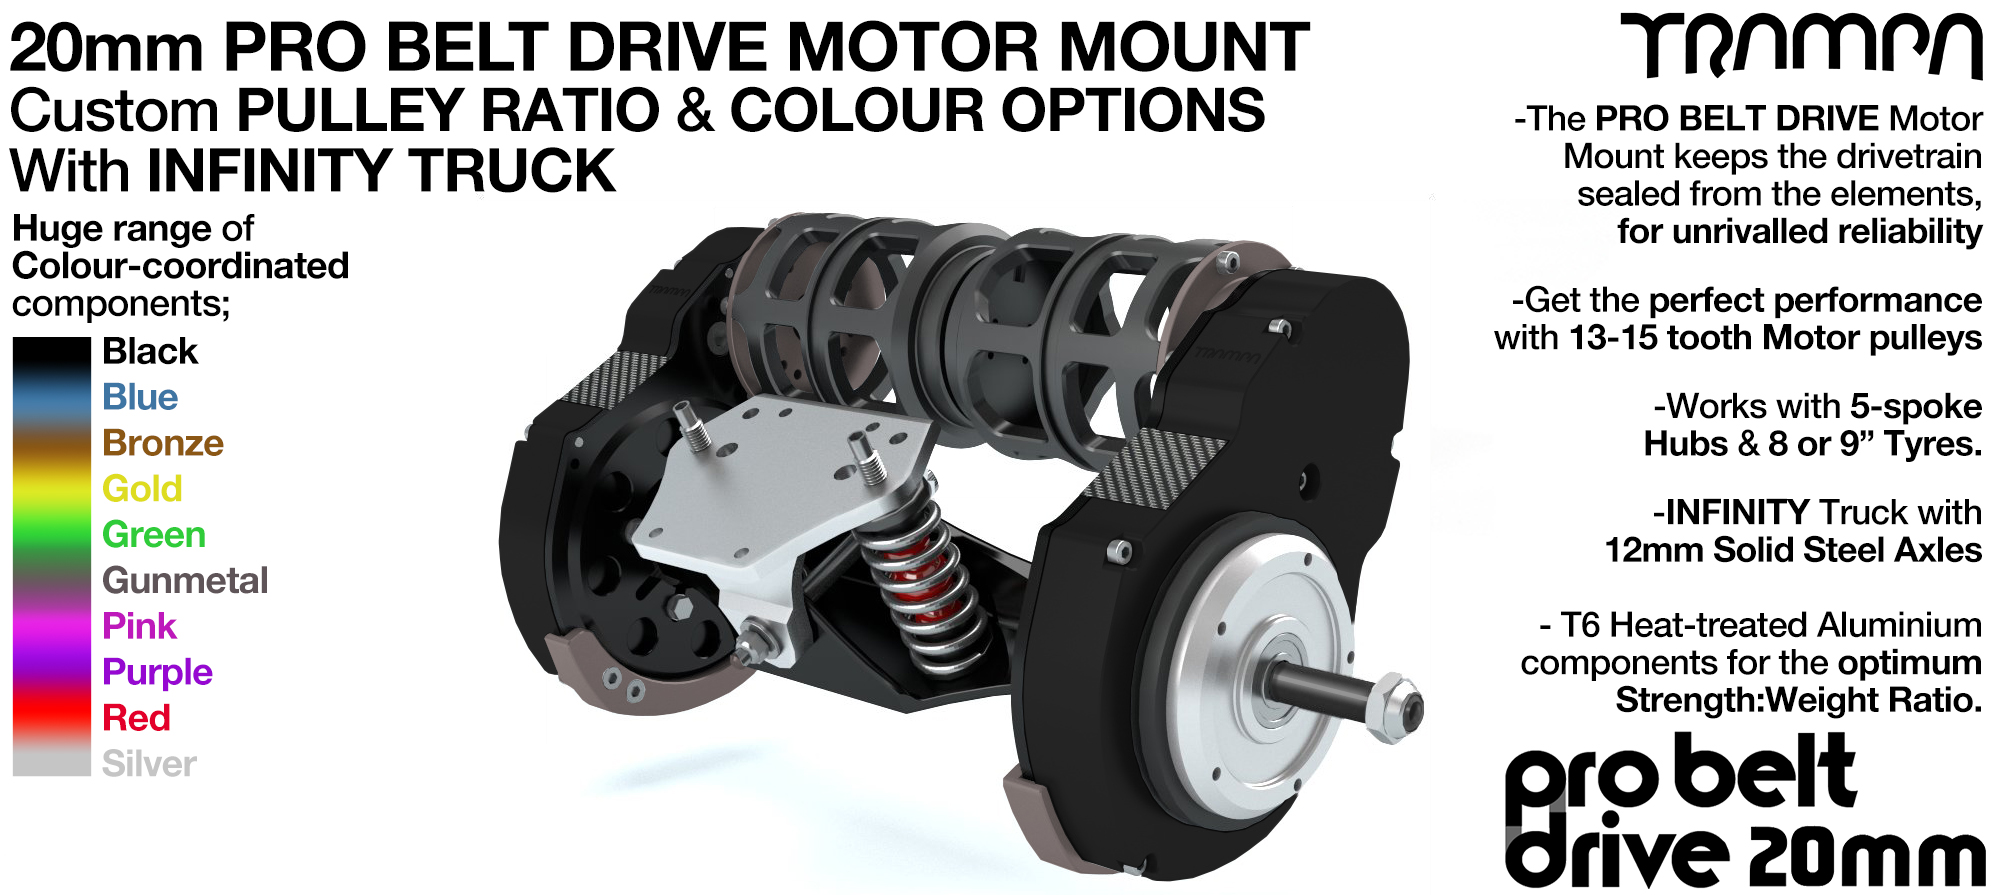 20mm PRO BELT DRIVE Motor Mounts with PULLEYS & FILTERS mounted on a Truck - NO Motors 